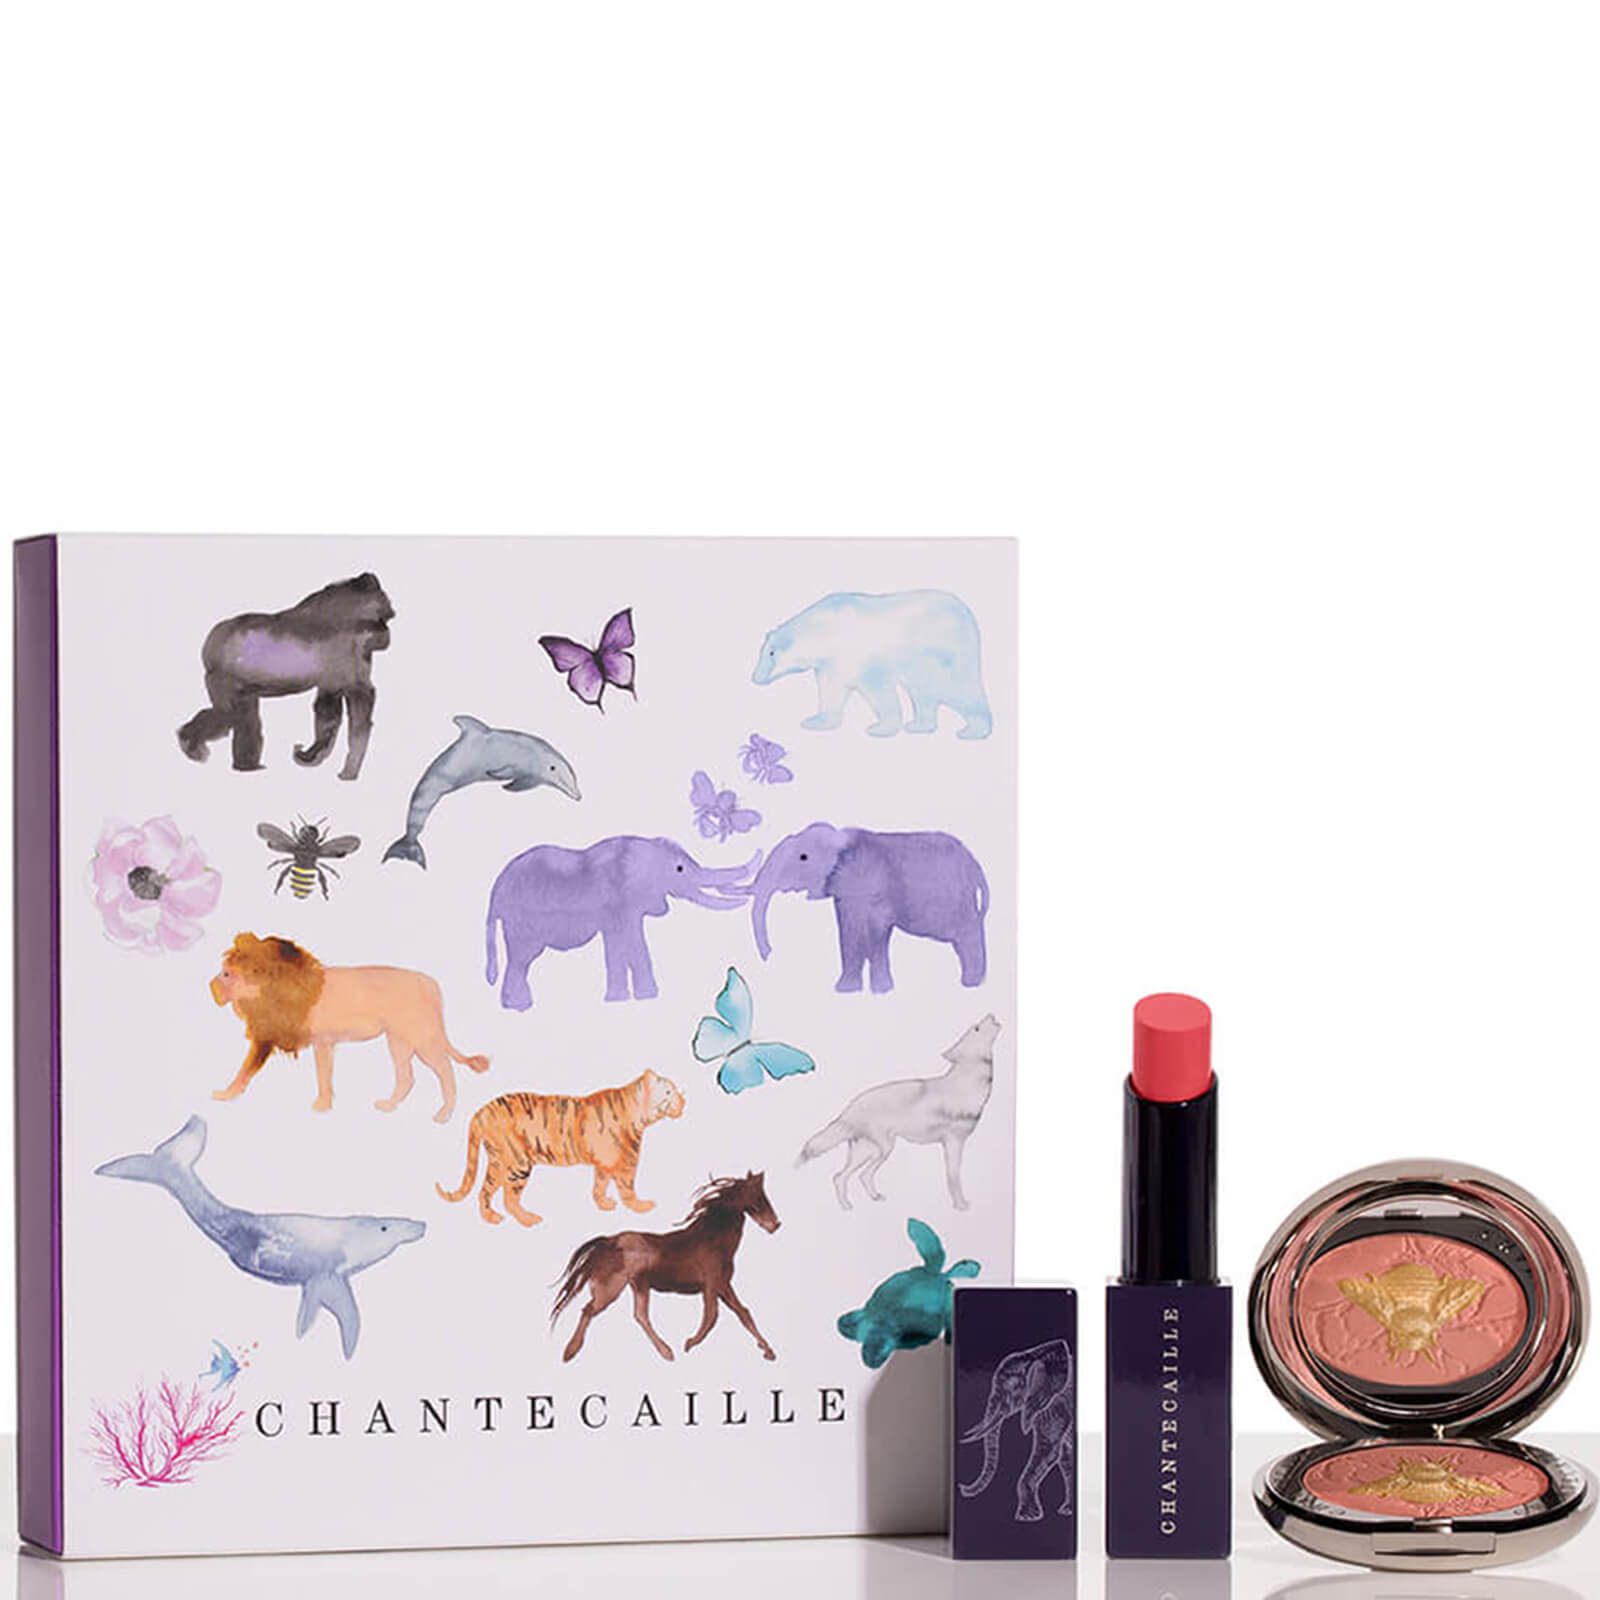 Chantecaille Wild Pairs Set: Cheek and Lip Duo - Emotion